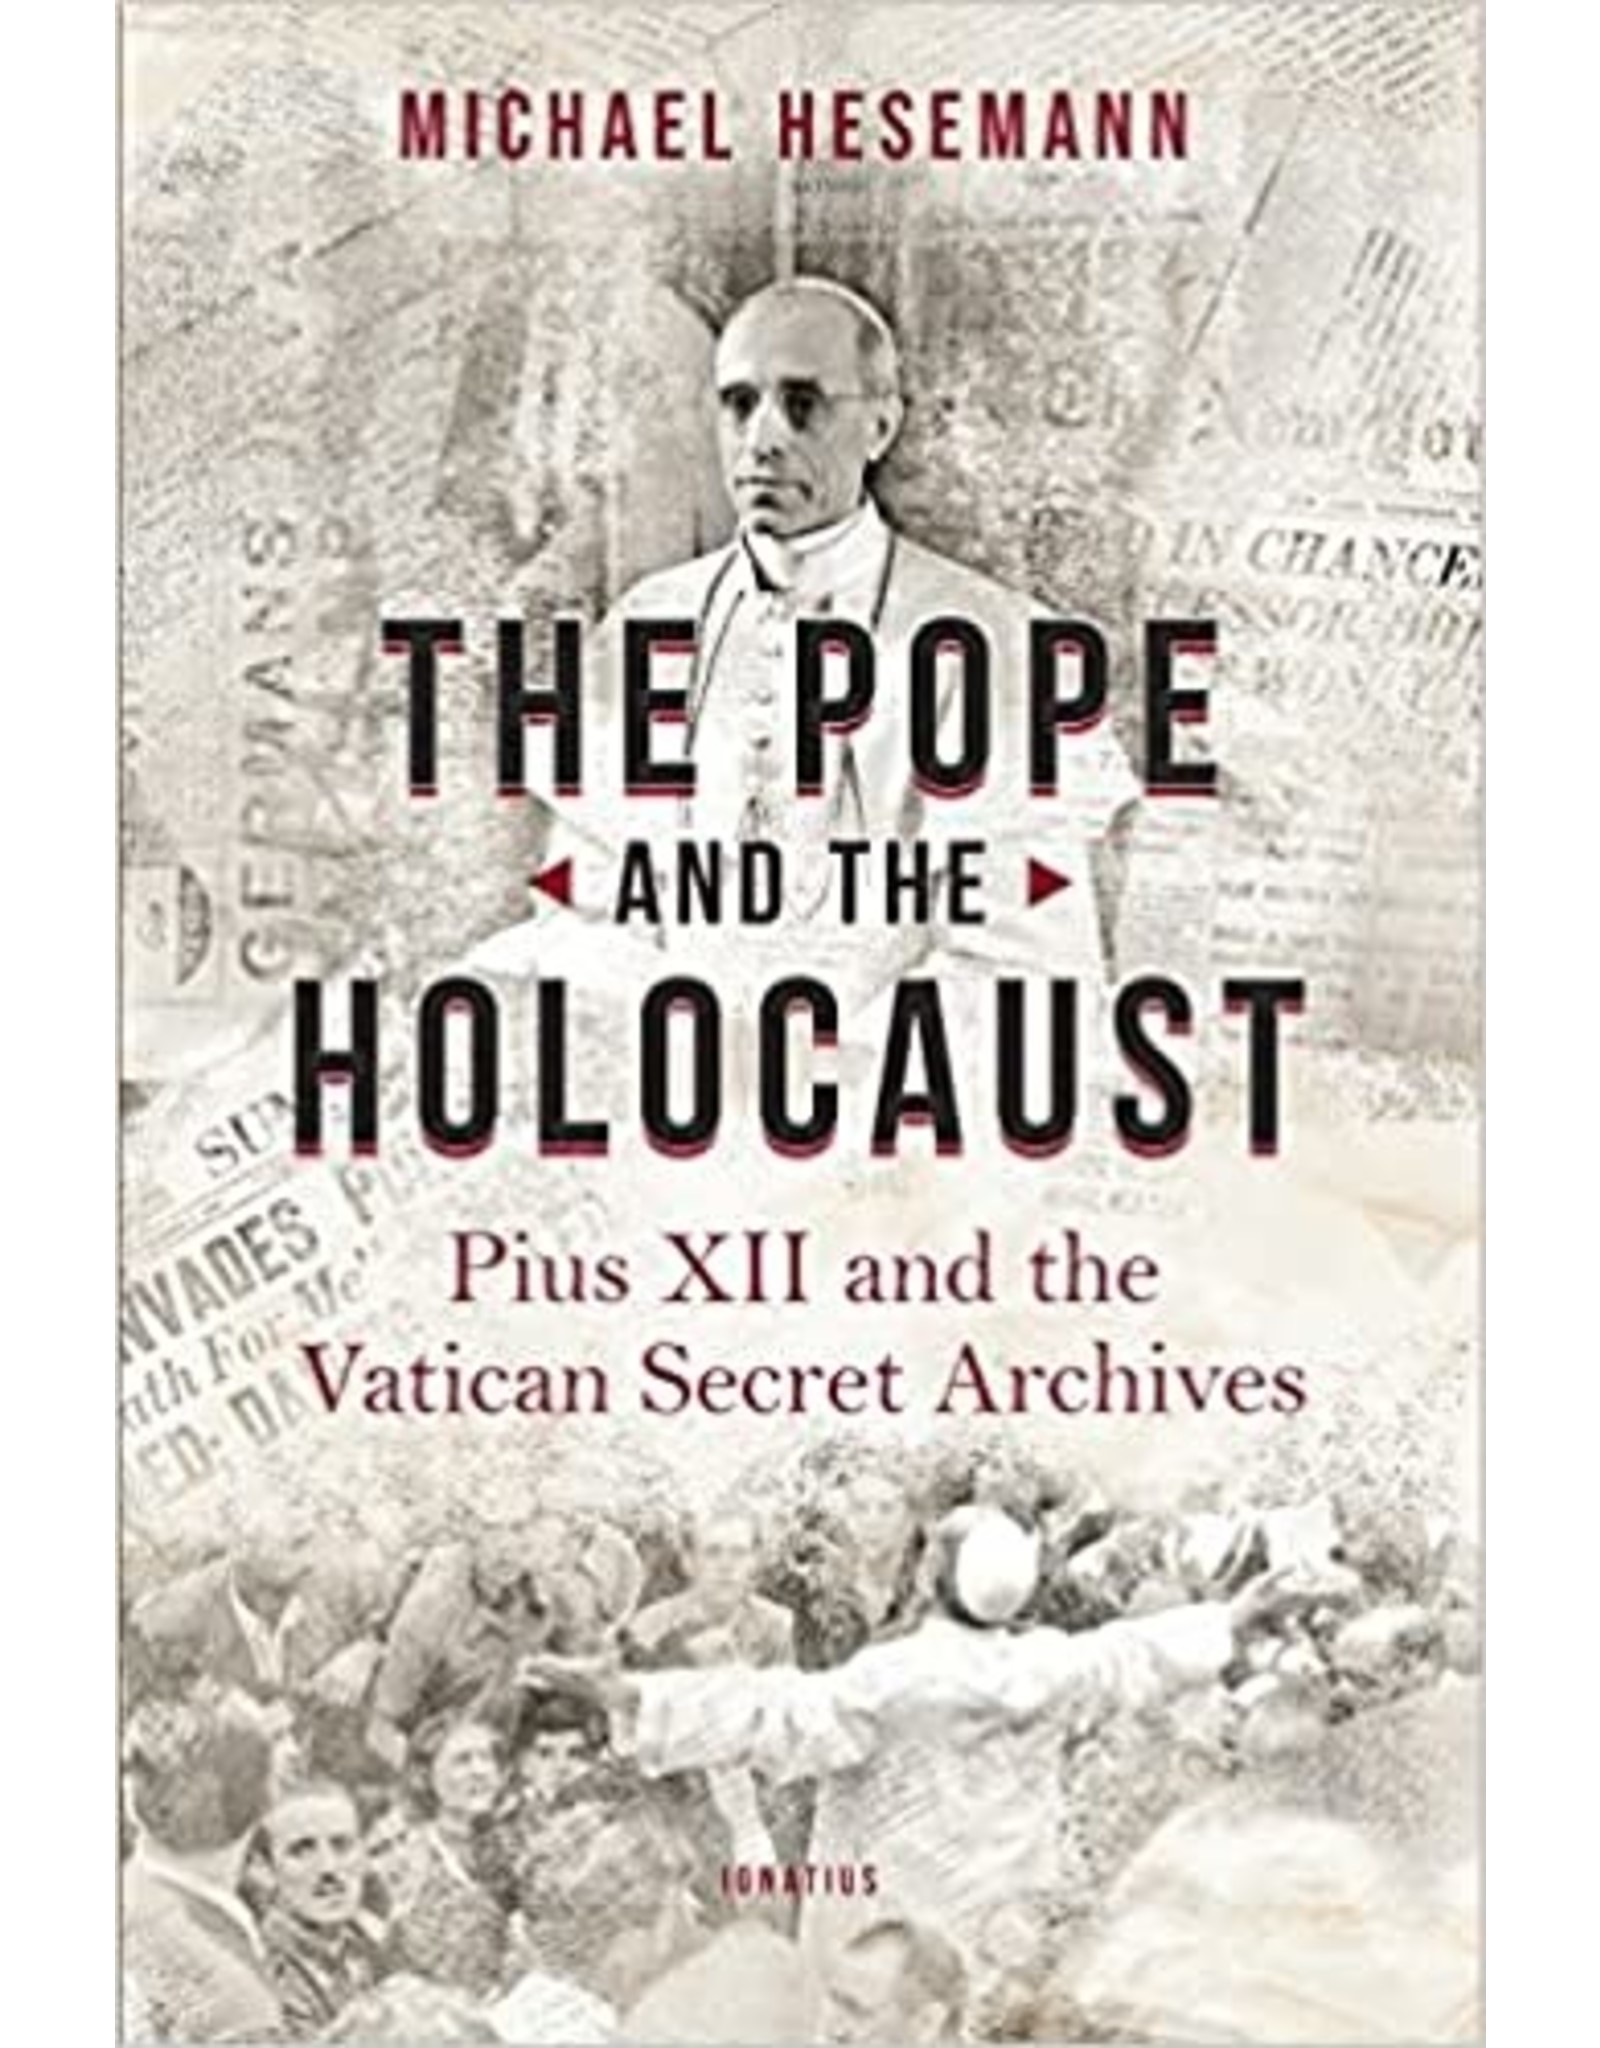 The Pope and the Holocaust: Pius XII and the Secret Vatican Archives